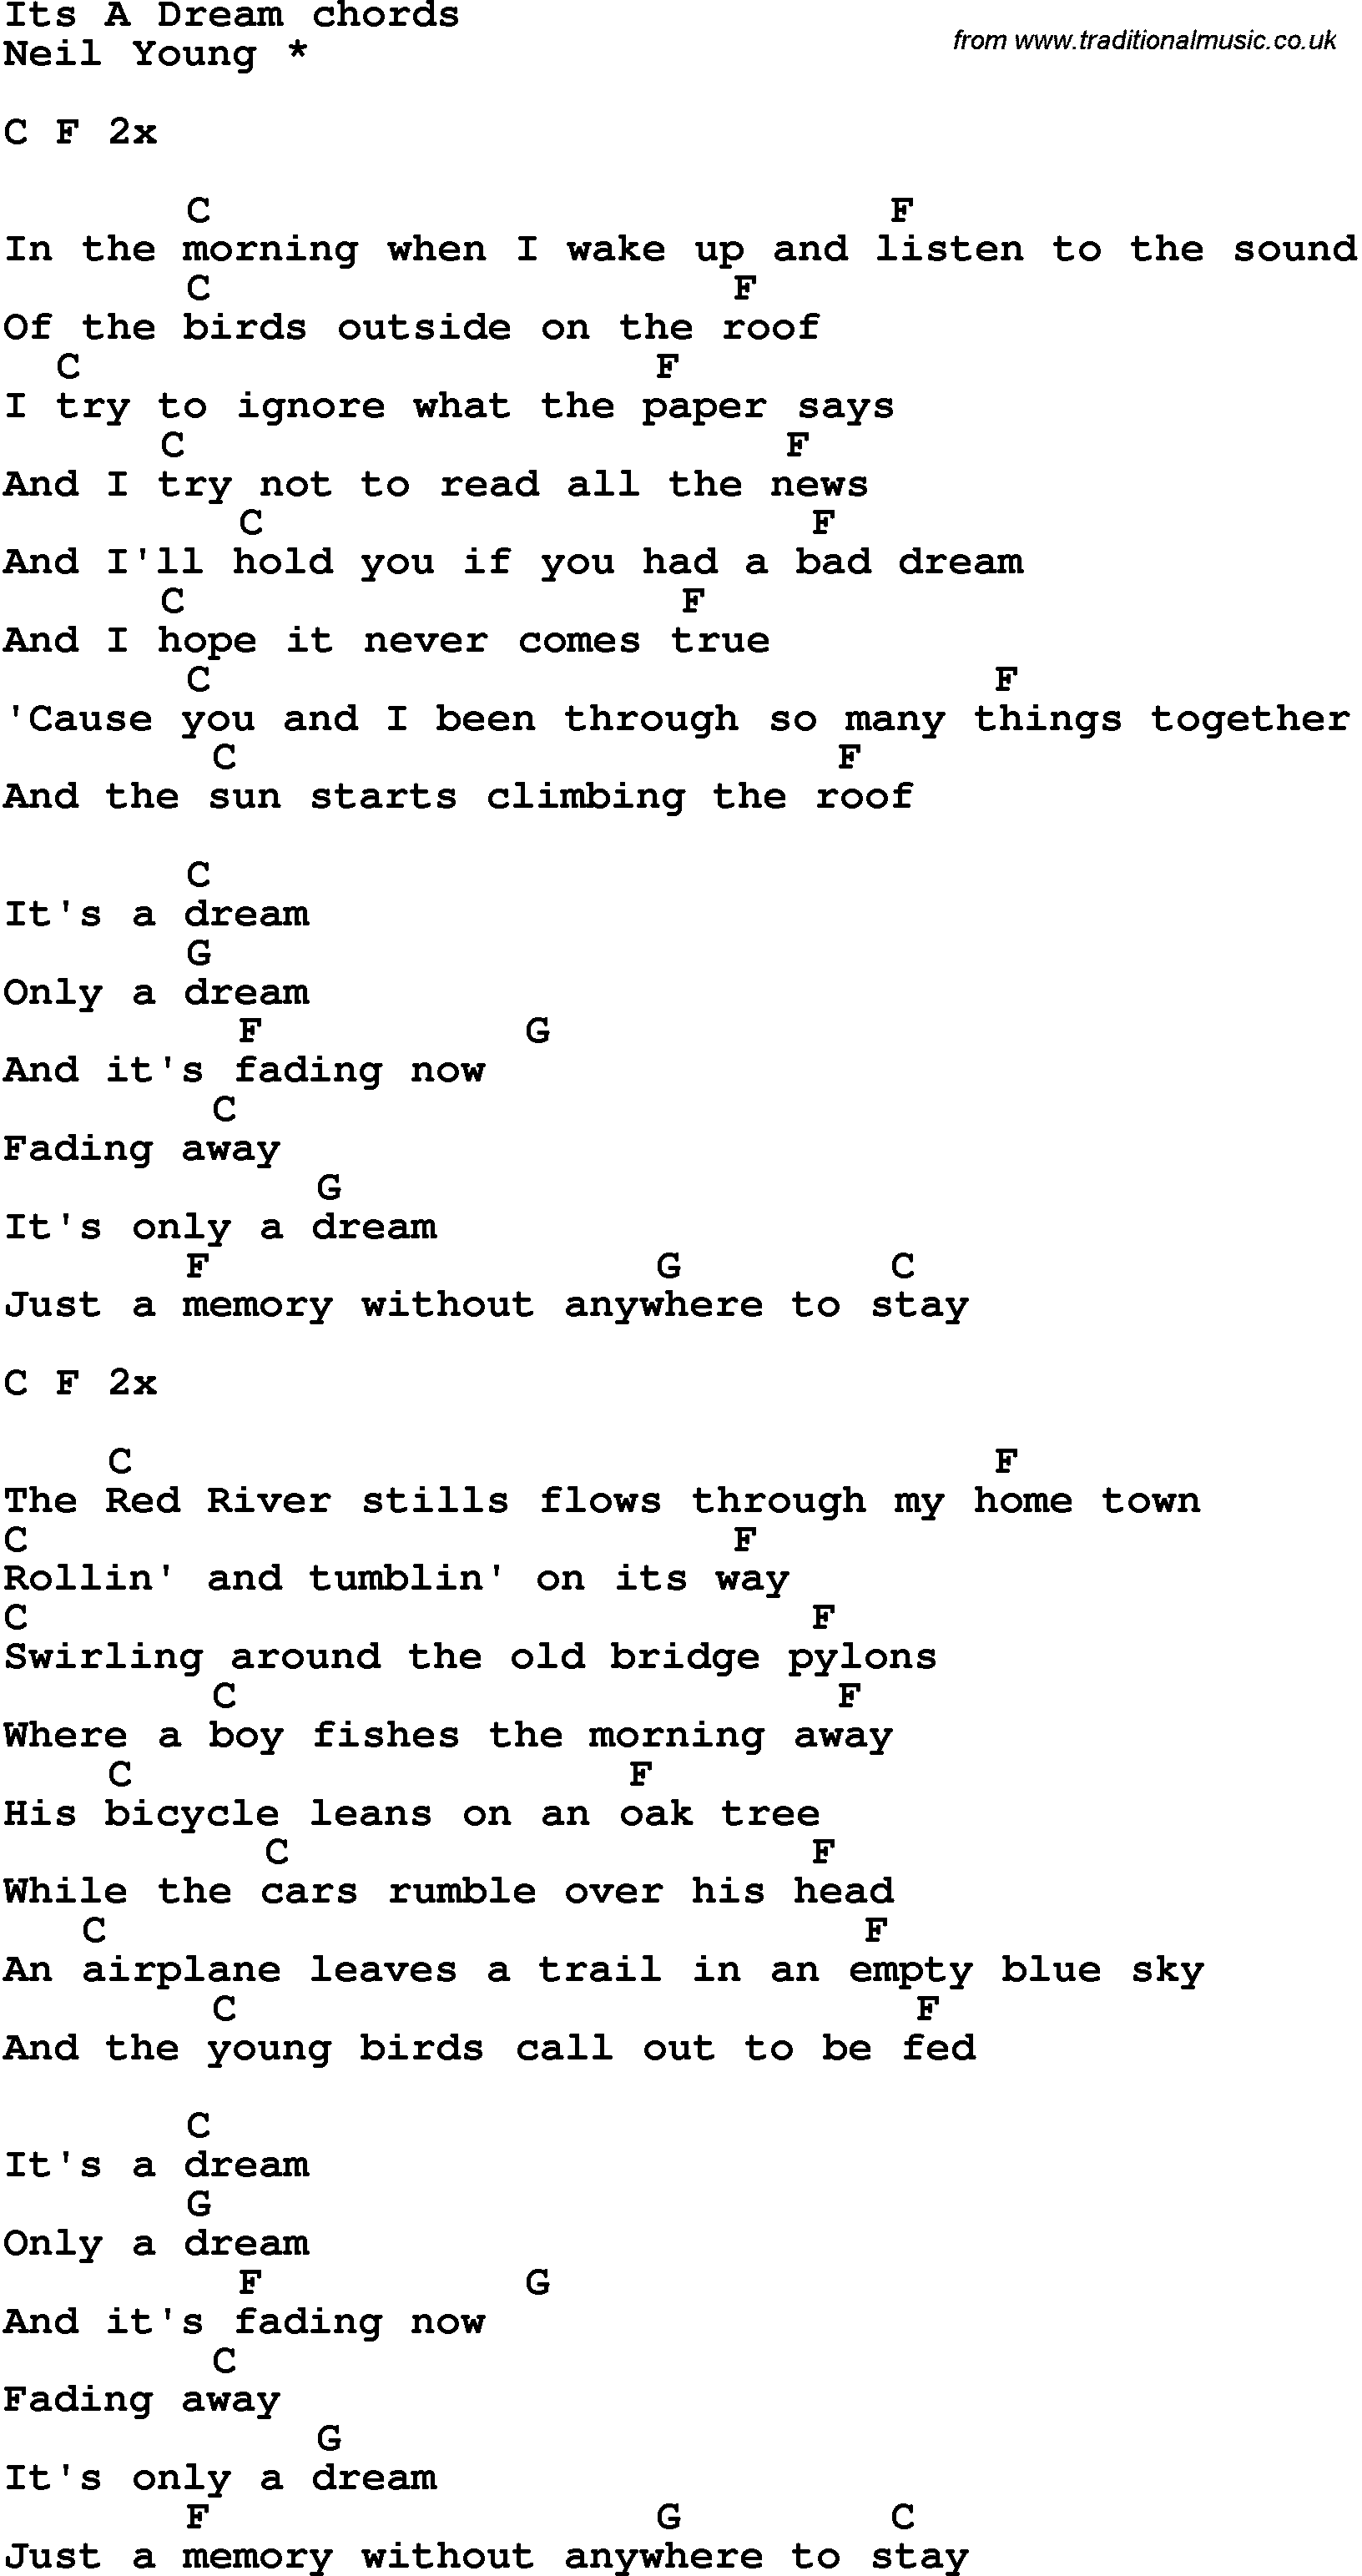 Song Lyrics with guitar chords for It's A Dream